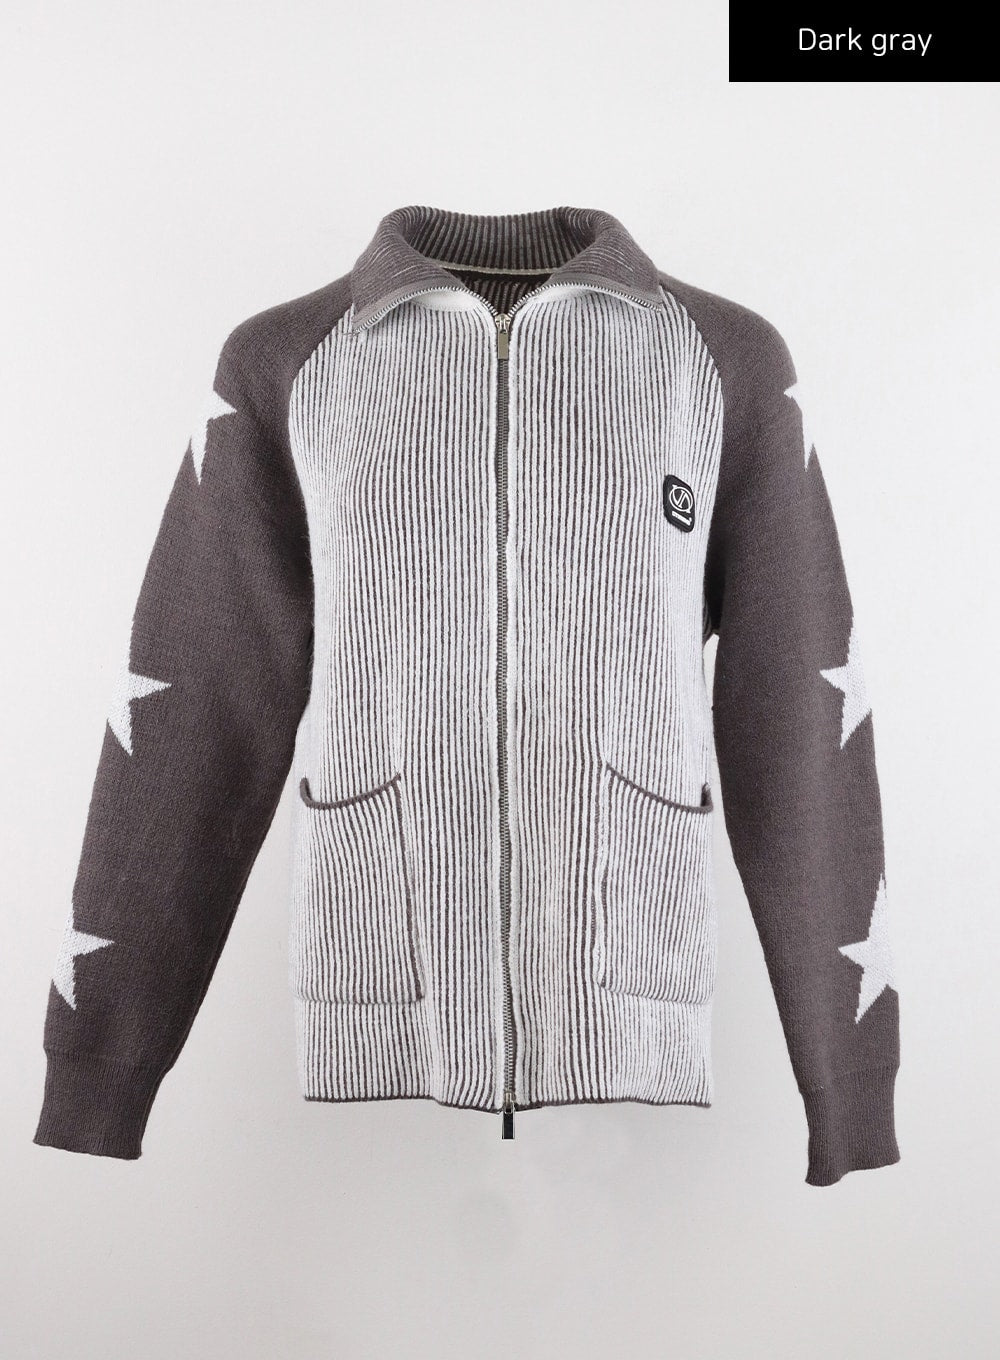 acubi-star-graphic-knit-zip-up-sweater-cd304